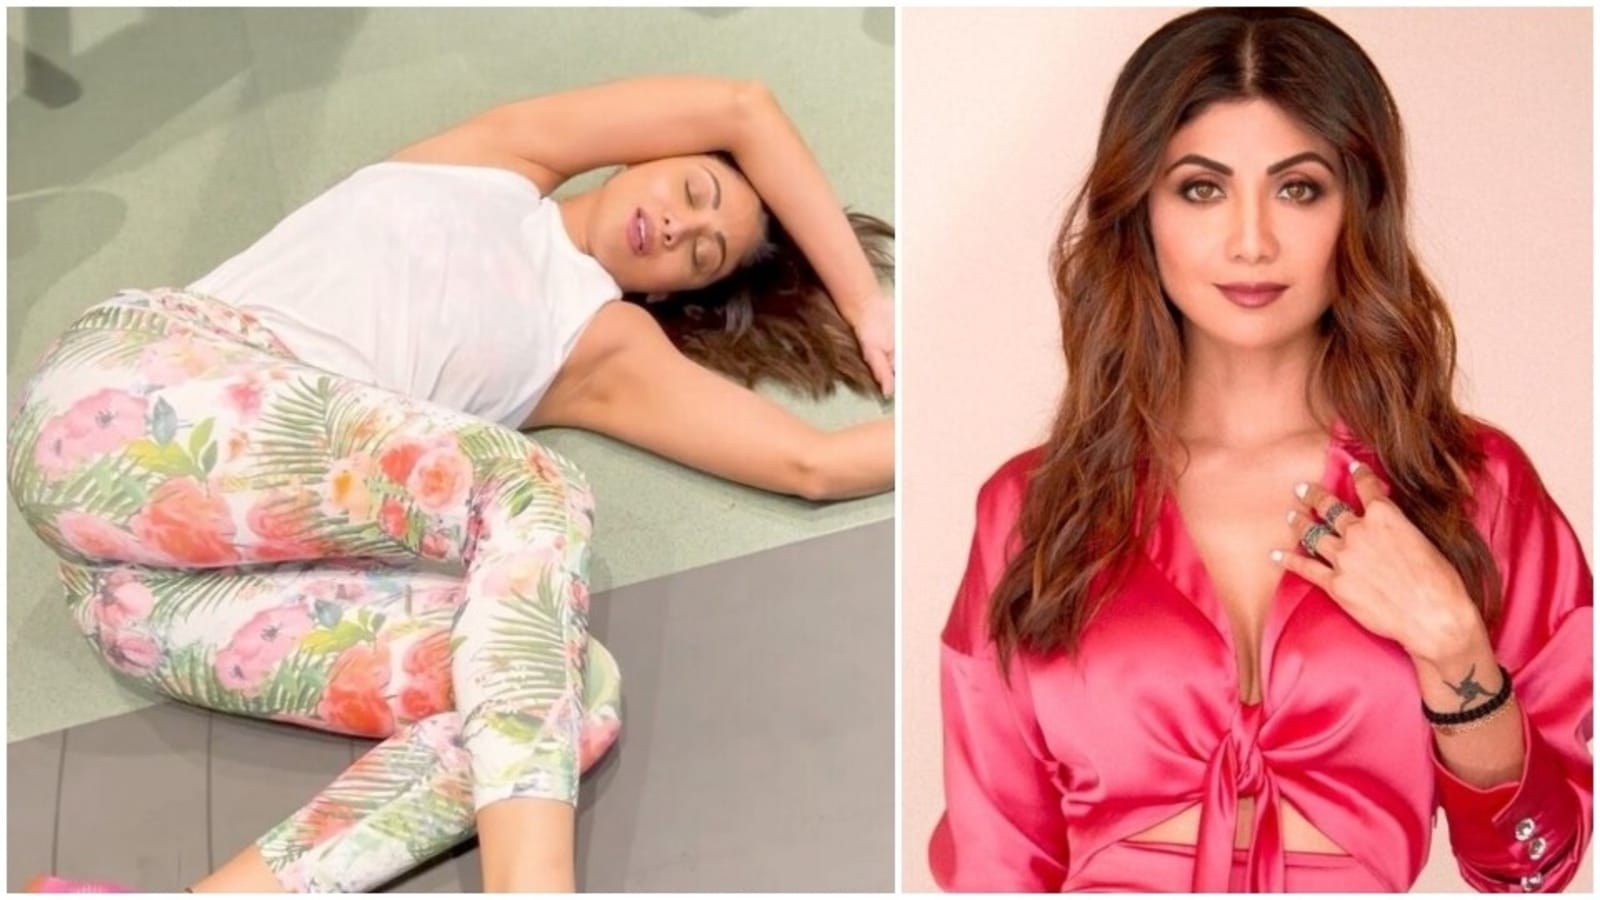 Shilpa Shetee Xxx - Shilpa Shetty passes out after tough workout in funny post-gym video: Watch  | Health - Hindustan Times